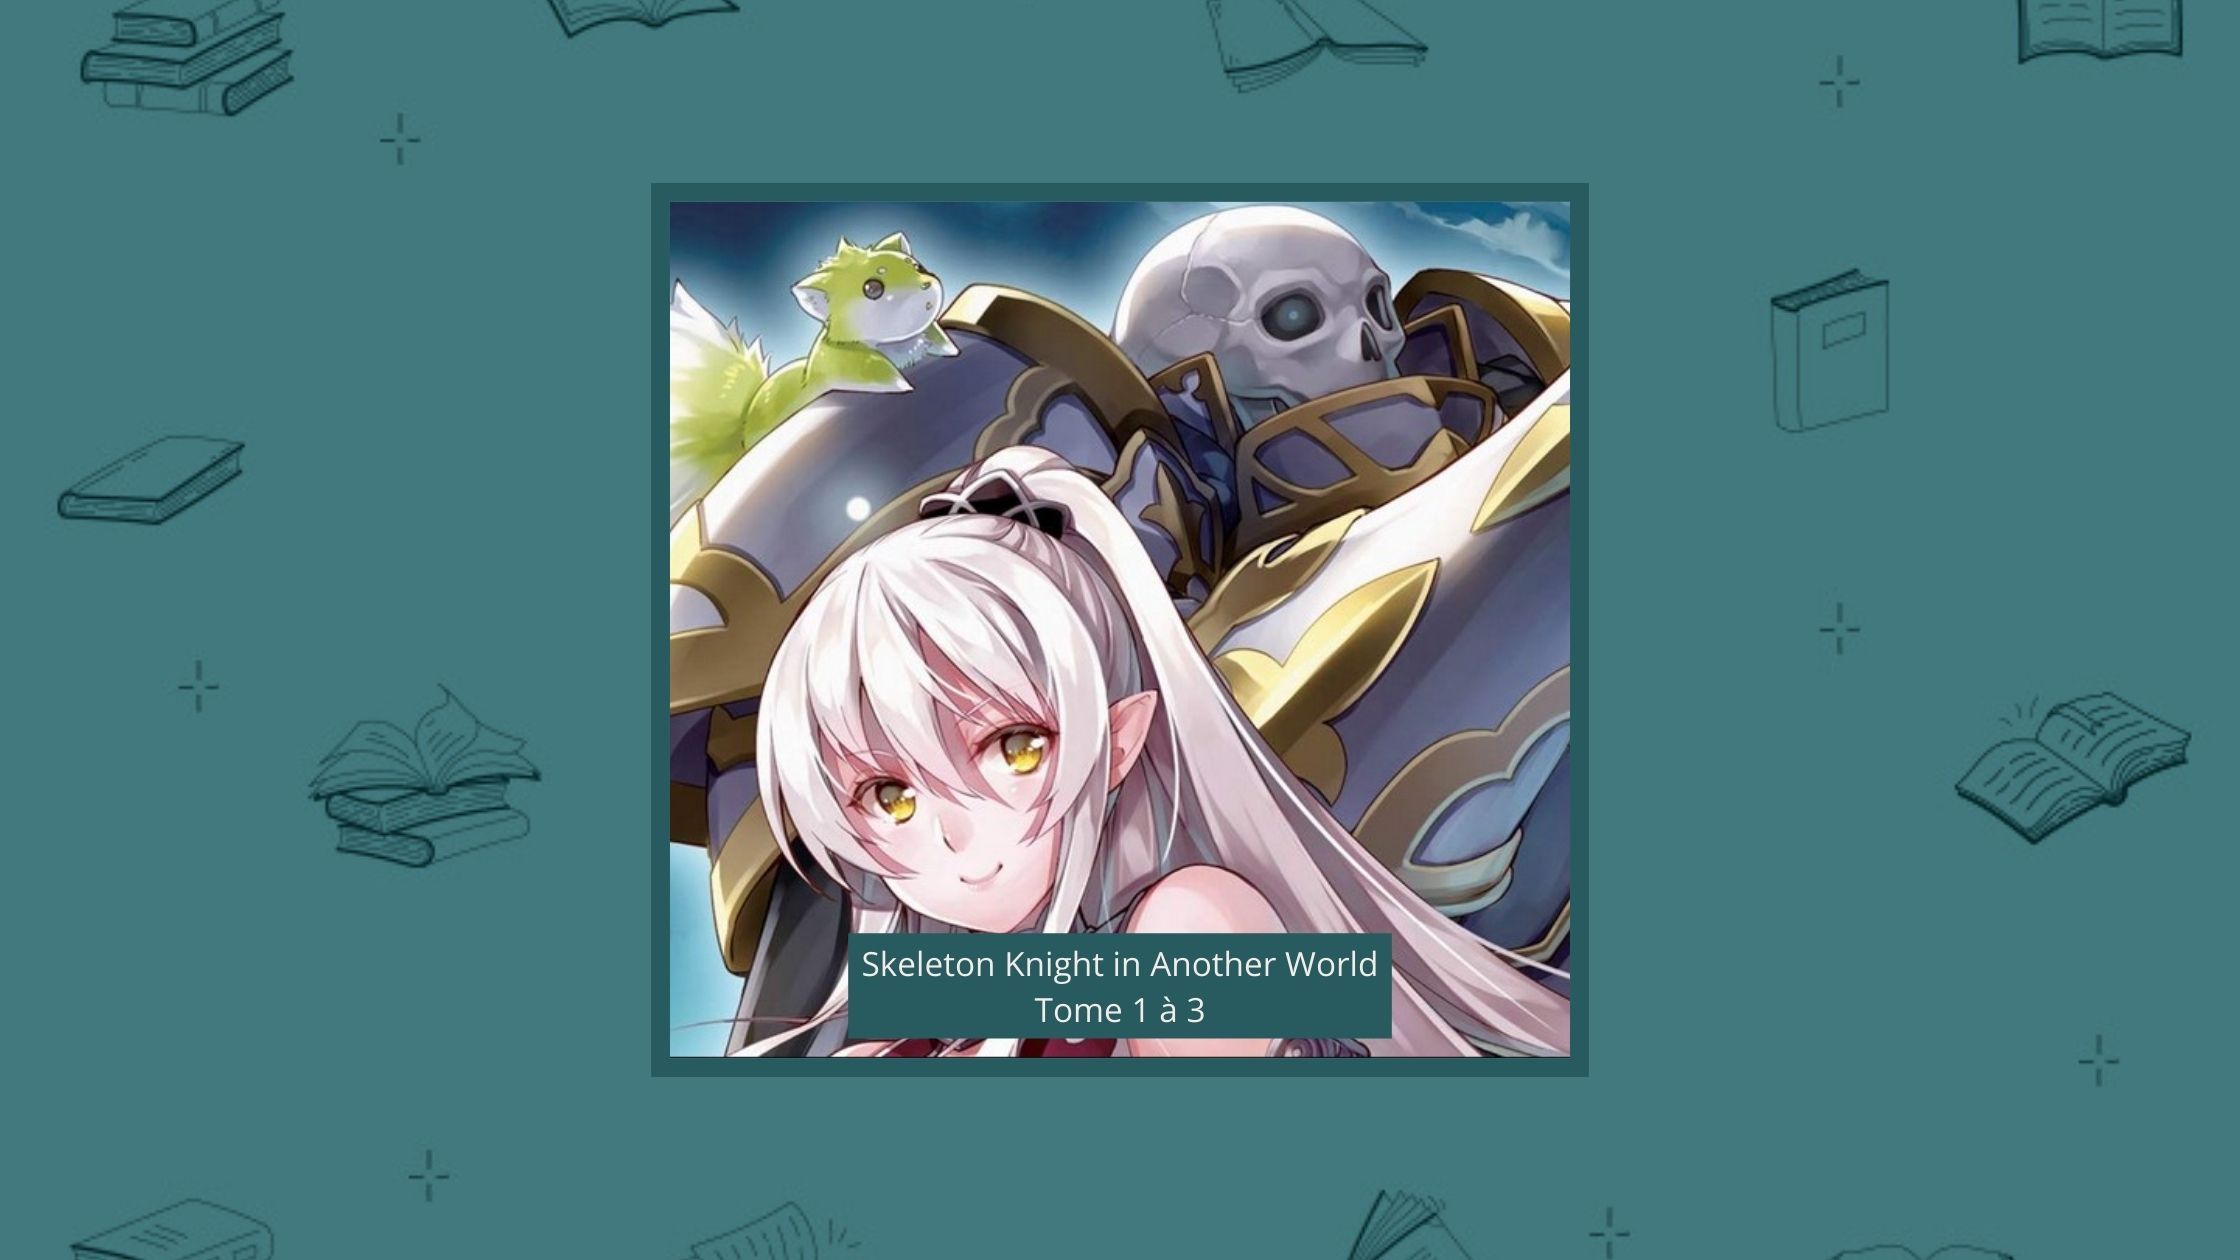 Skeleton Knight in Another World Tome 1 à 3